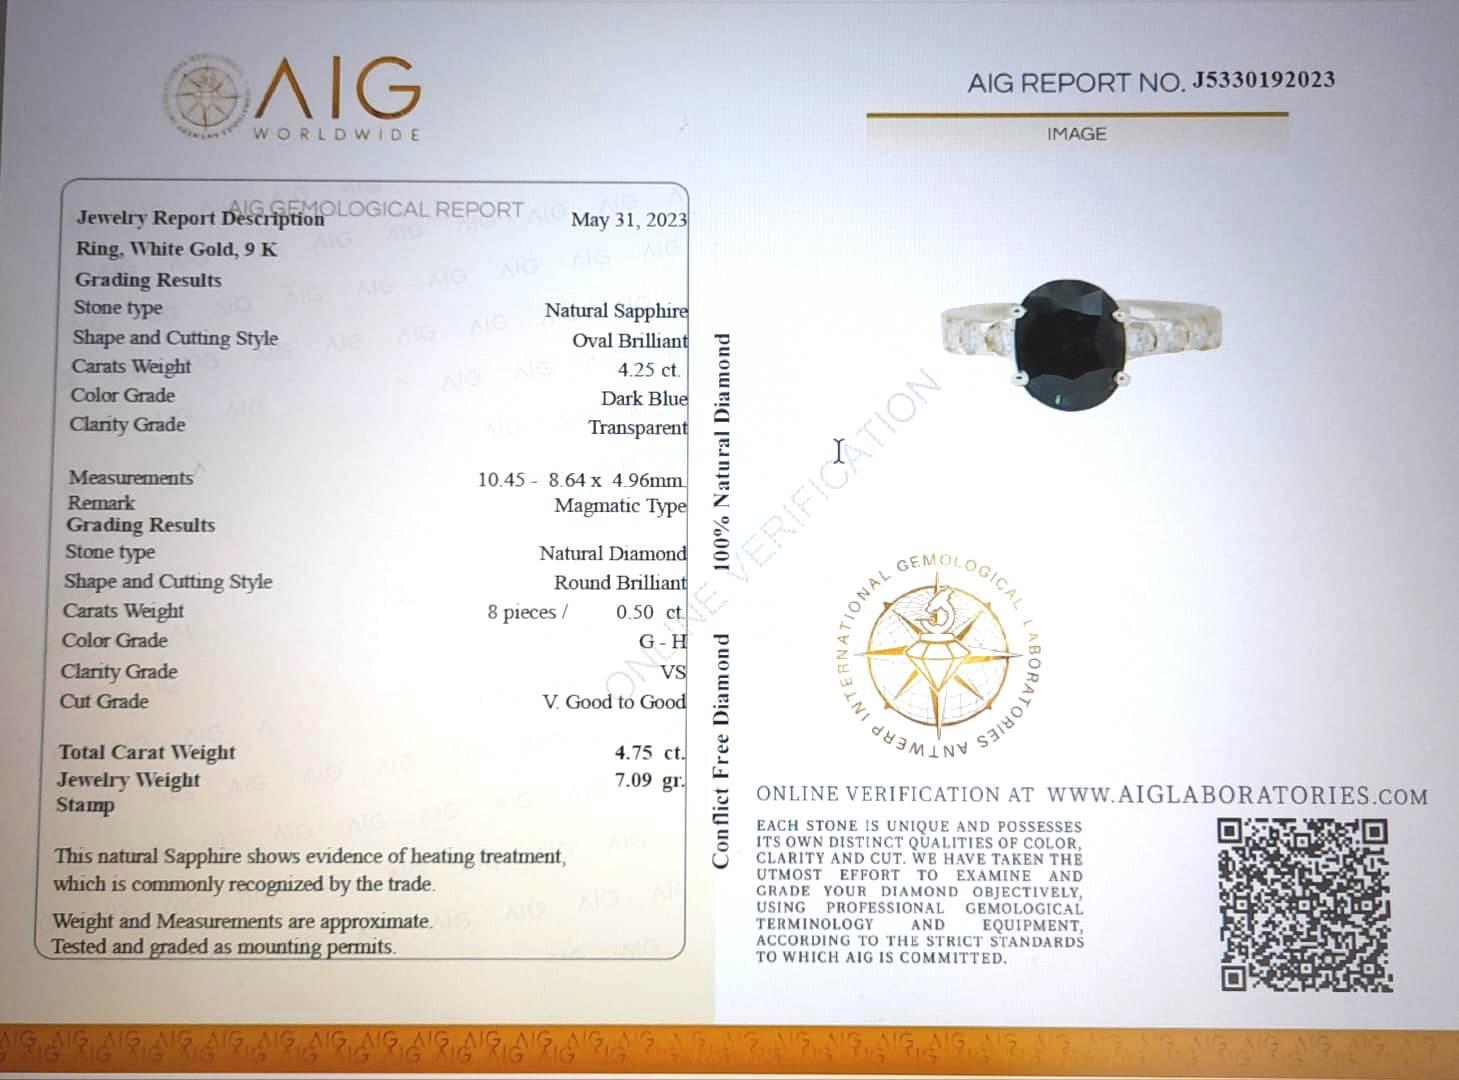 Stunning solitaire ring featuring a natural  dark blue sapphire oval cut and 8 diamonds on the ring shoulders. Handmade in 9k white gold. Marked with the Italian gold mark 375 and Botta Gioielli brandmark 716MI.
Jewelry report: AIG no.